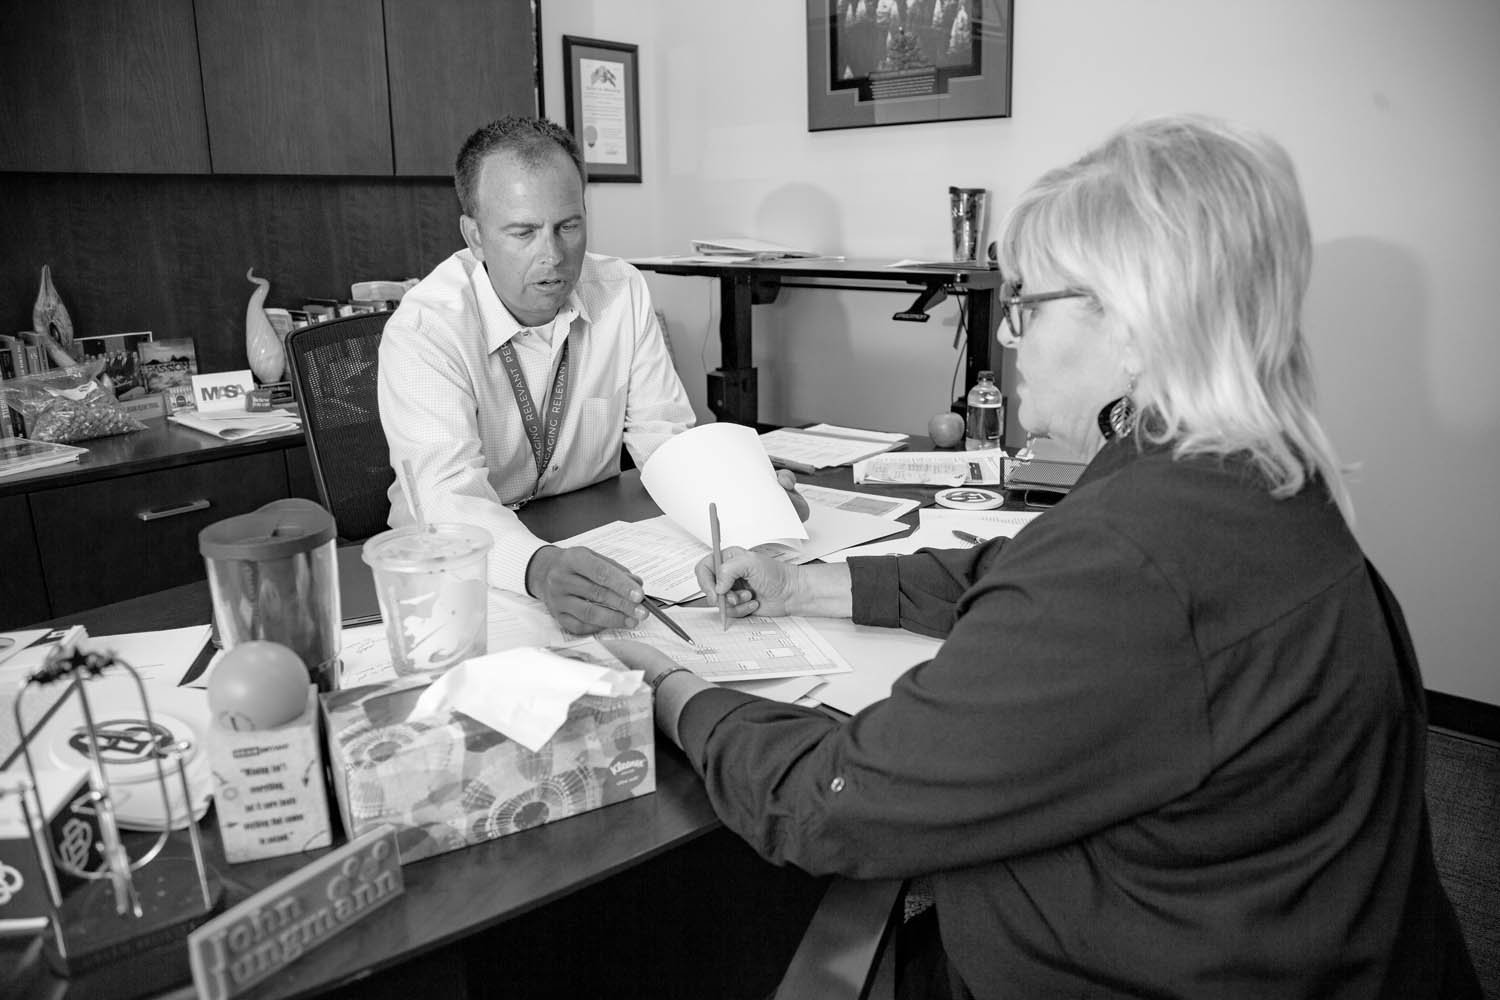 ON THE GO: Jungmann meets with Kathy Looten for upcoming travel plans. He has two work trips in July after he returns from a family vacation.